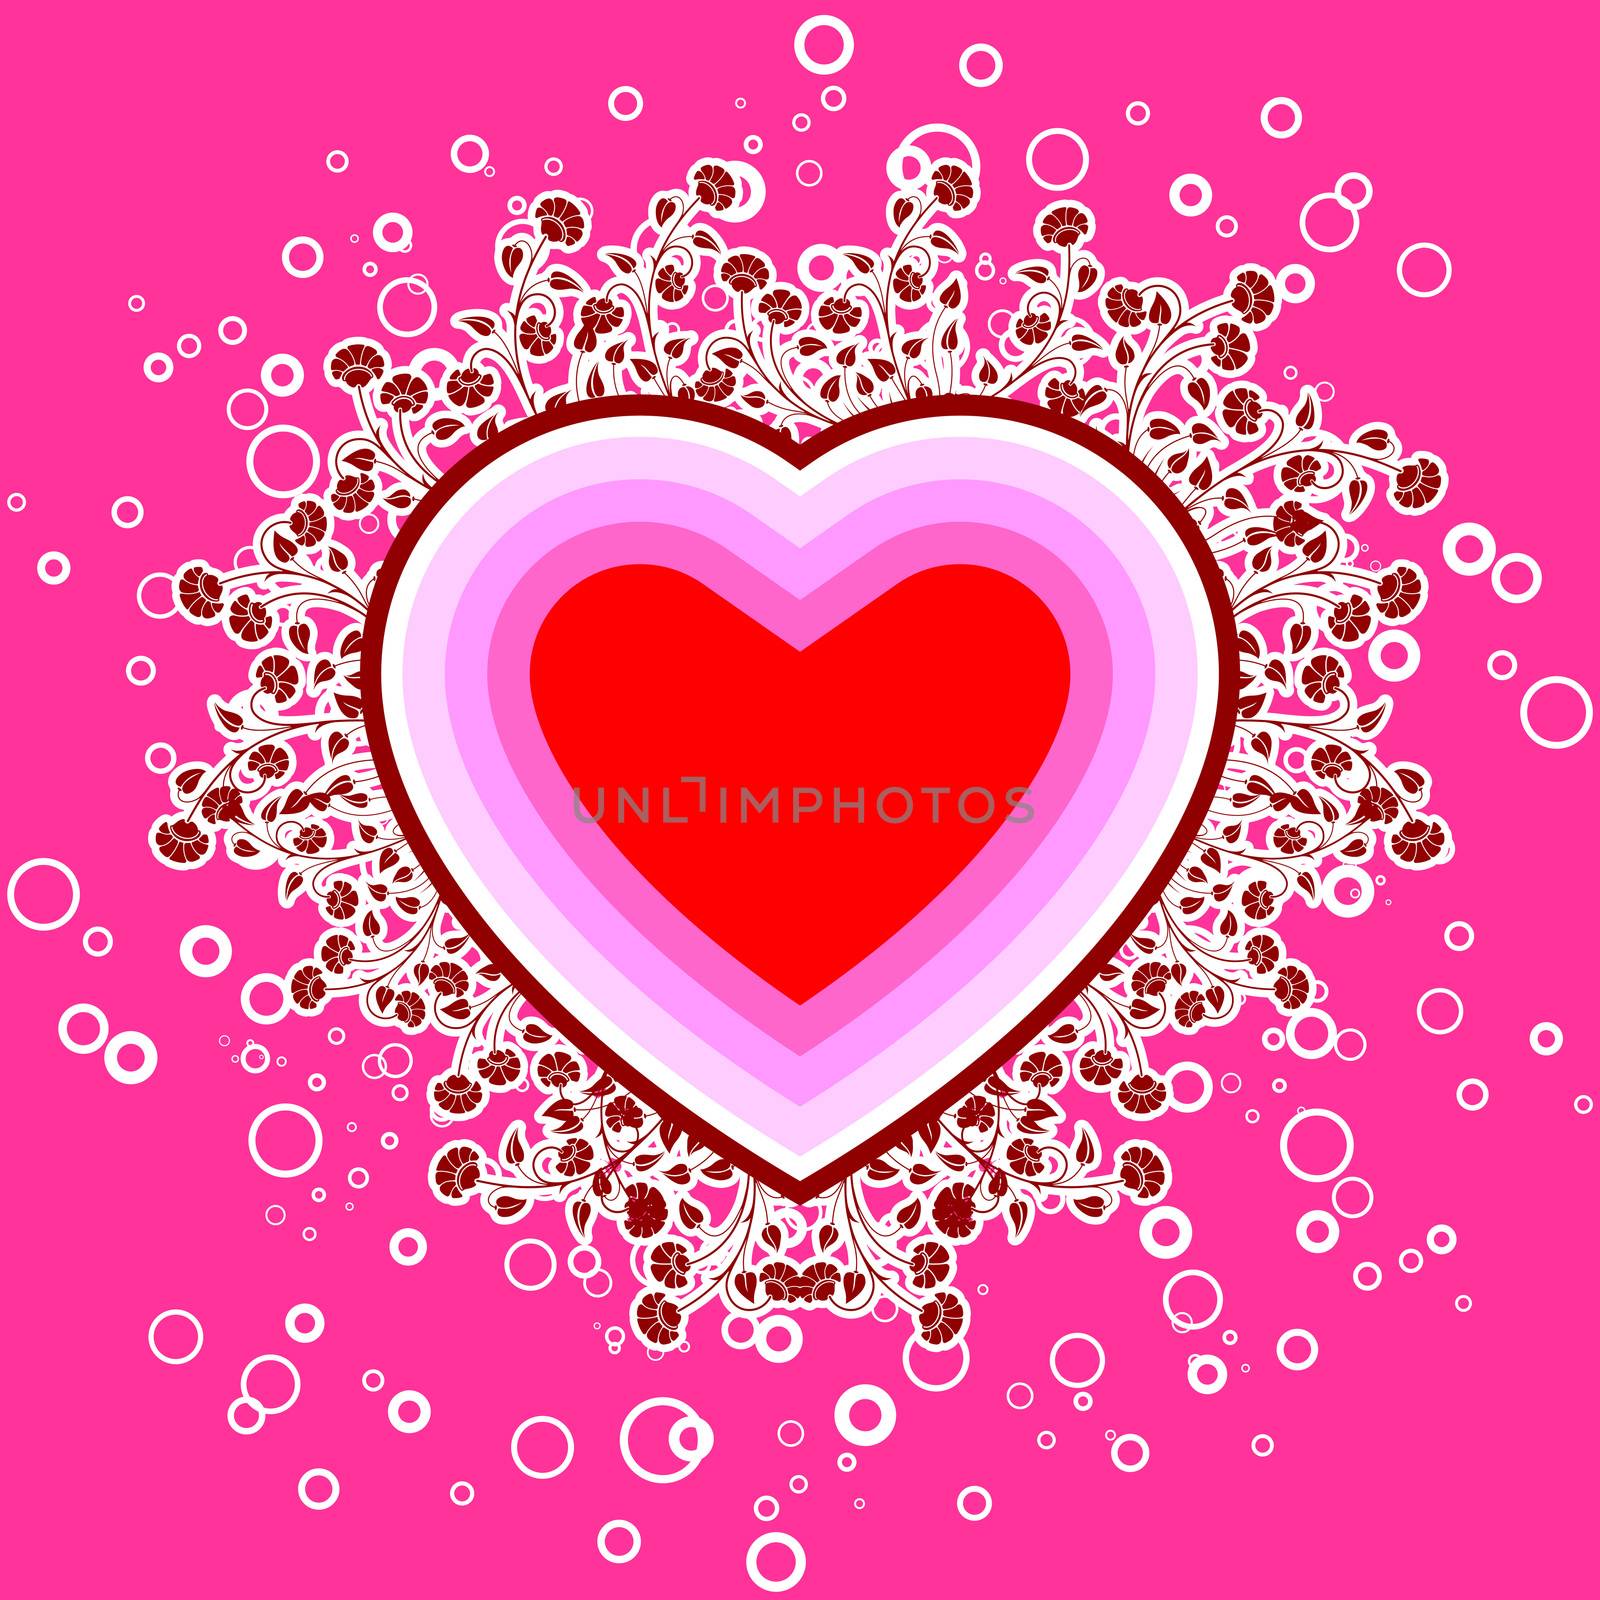 St. Valentine card with flowers and circles, vector illustration